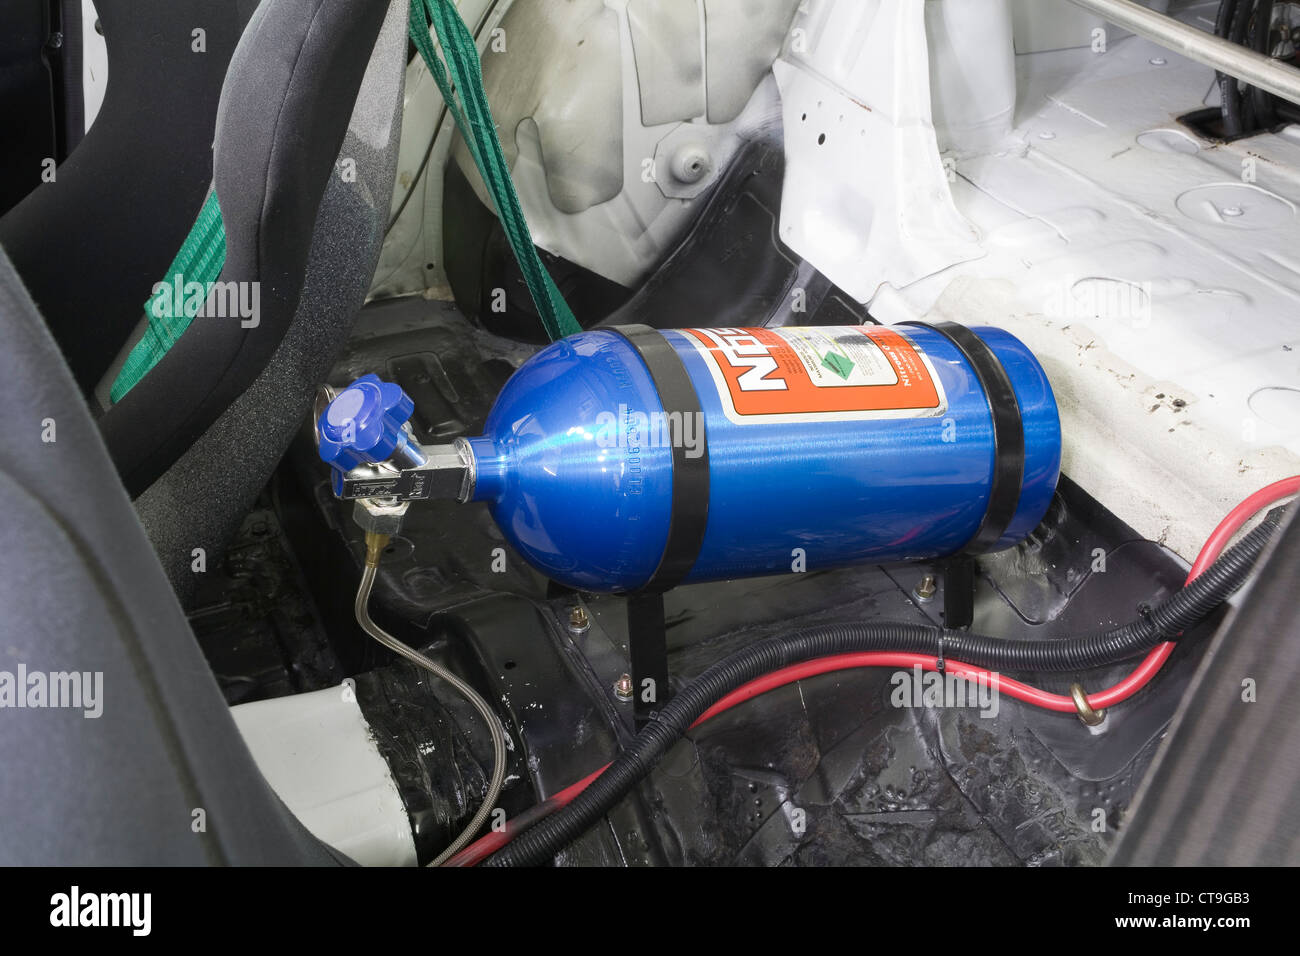 Nitrous oxide funny or laughing gas used to produce extra horsepower in a boy racer style modified custom race car. Stock Photo